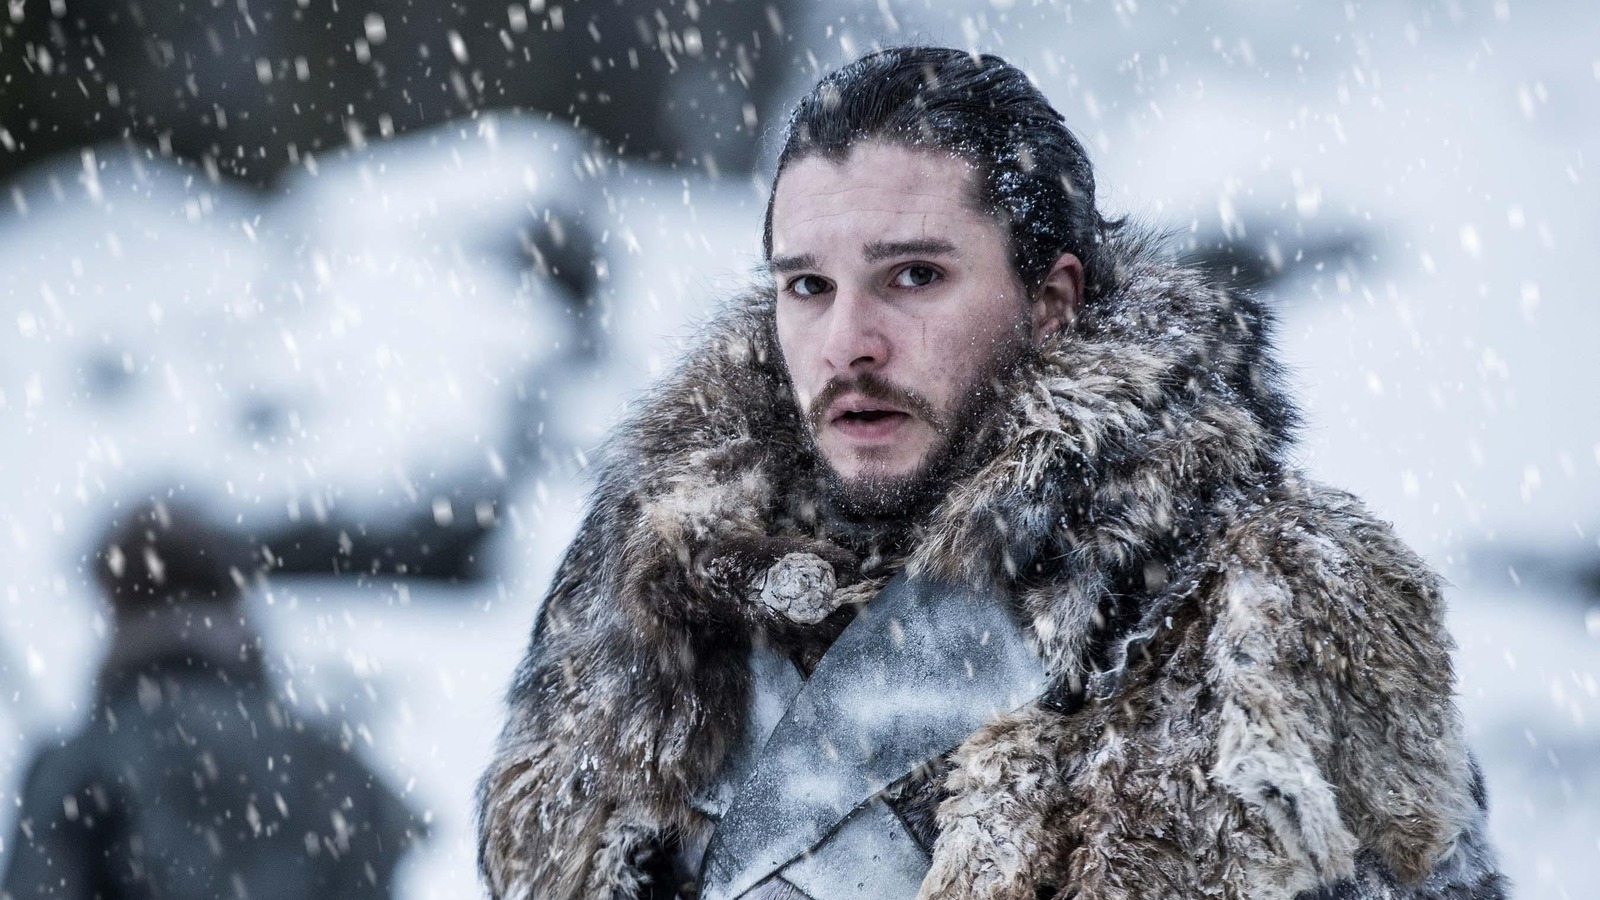 #Game Of Thrones Jon Snow Spin-Off Series In The Works, Kit Harington To Reprise Role